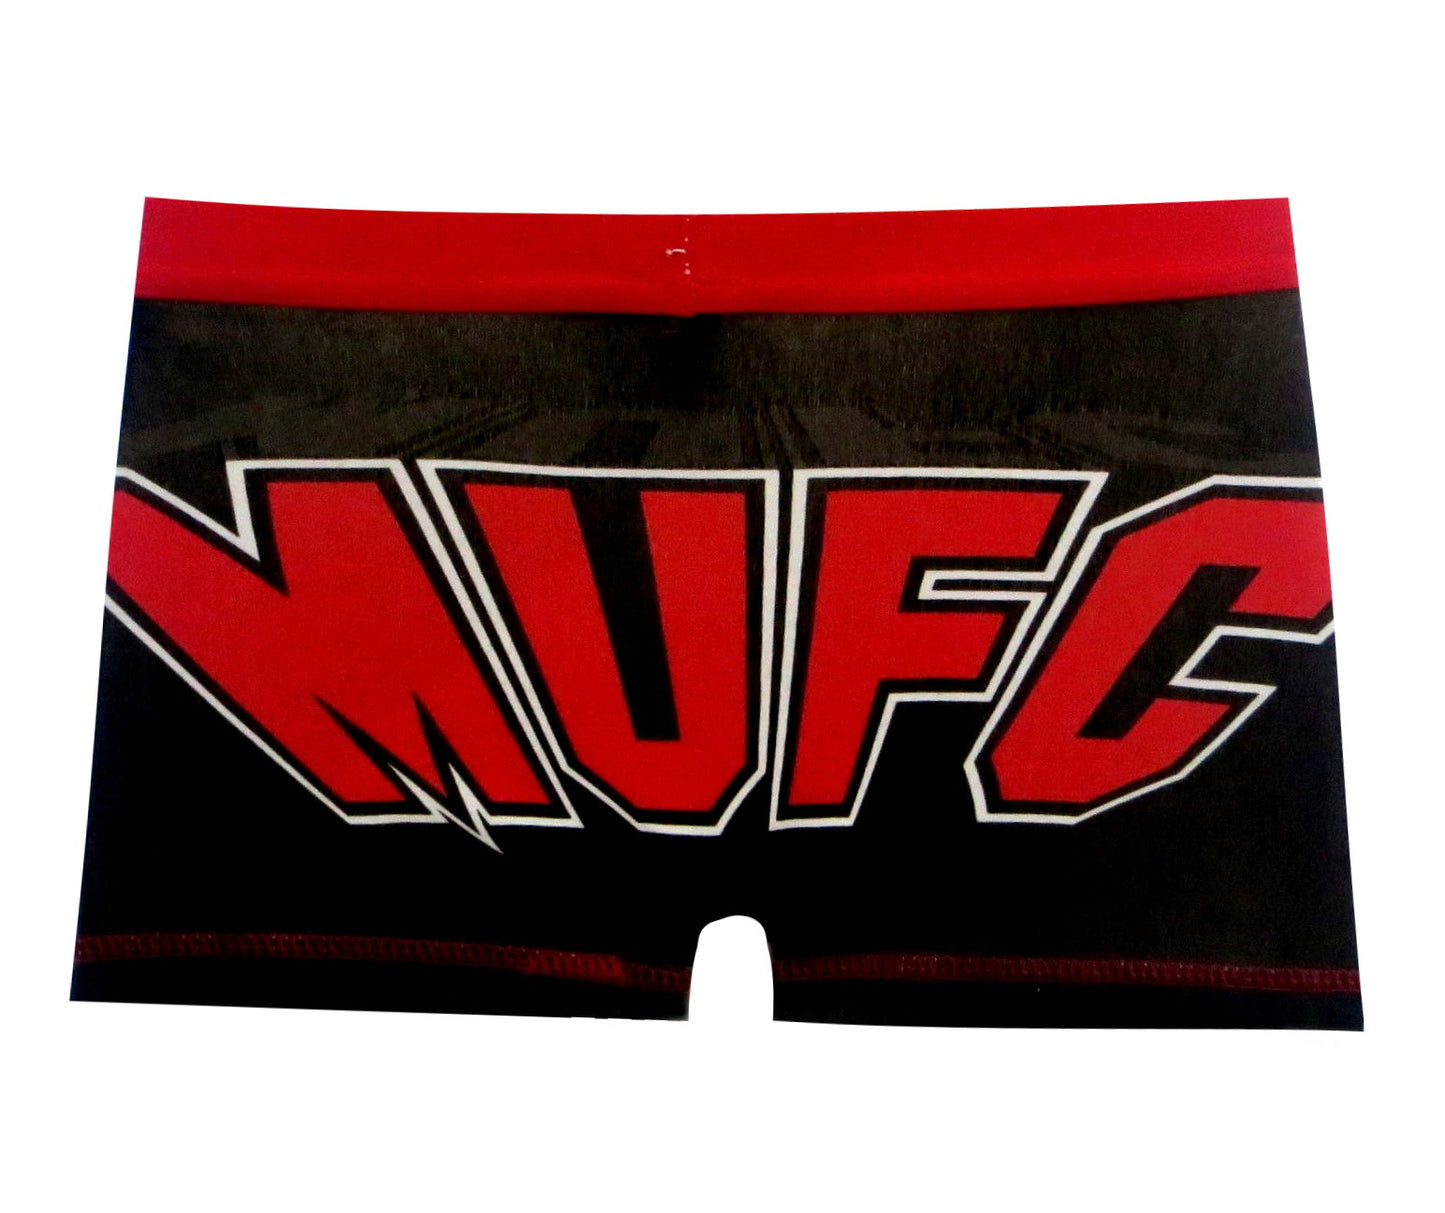 Manchester United Football Club Boys Black Boxer Shorts Age 5-8 Years Available